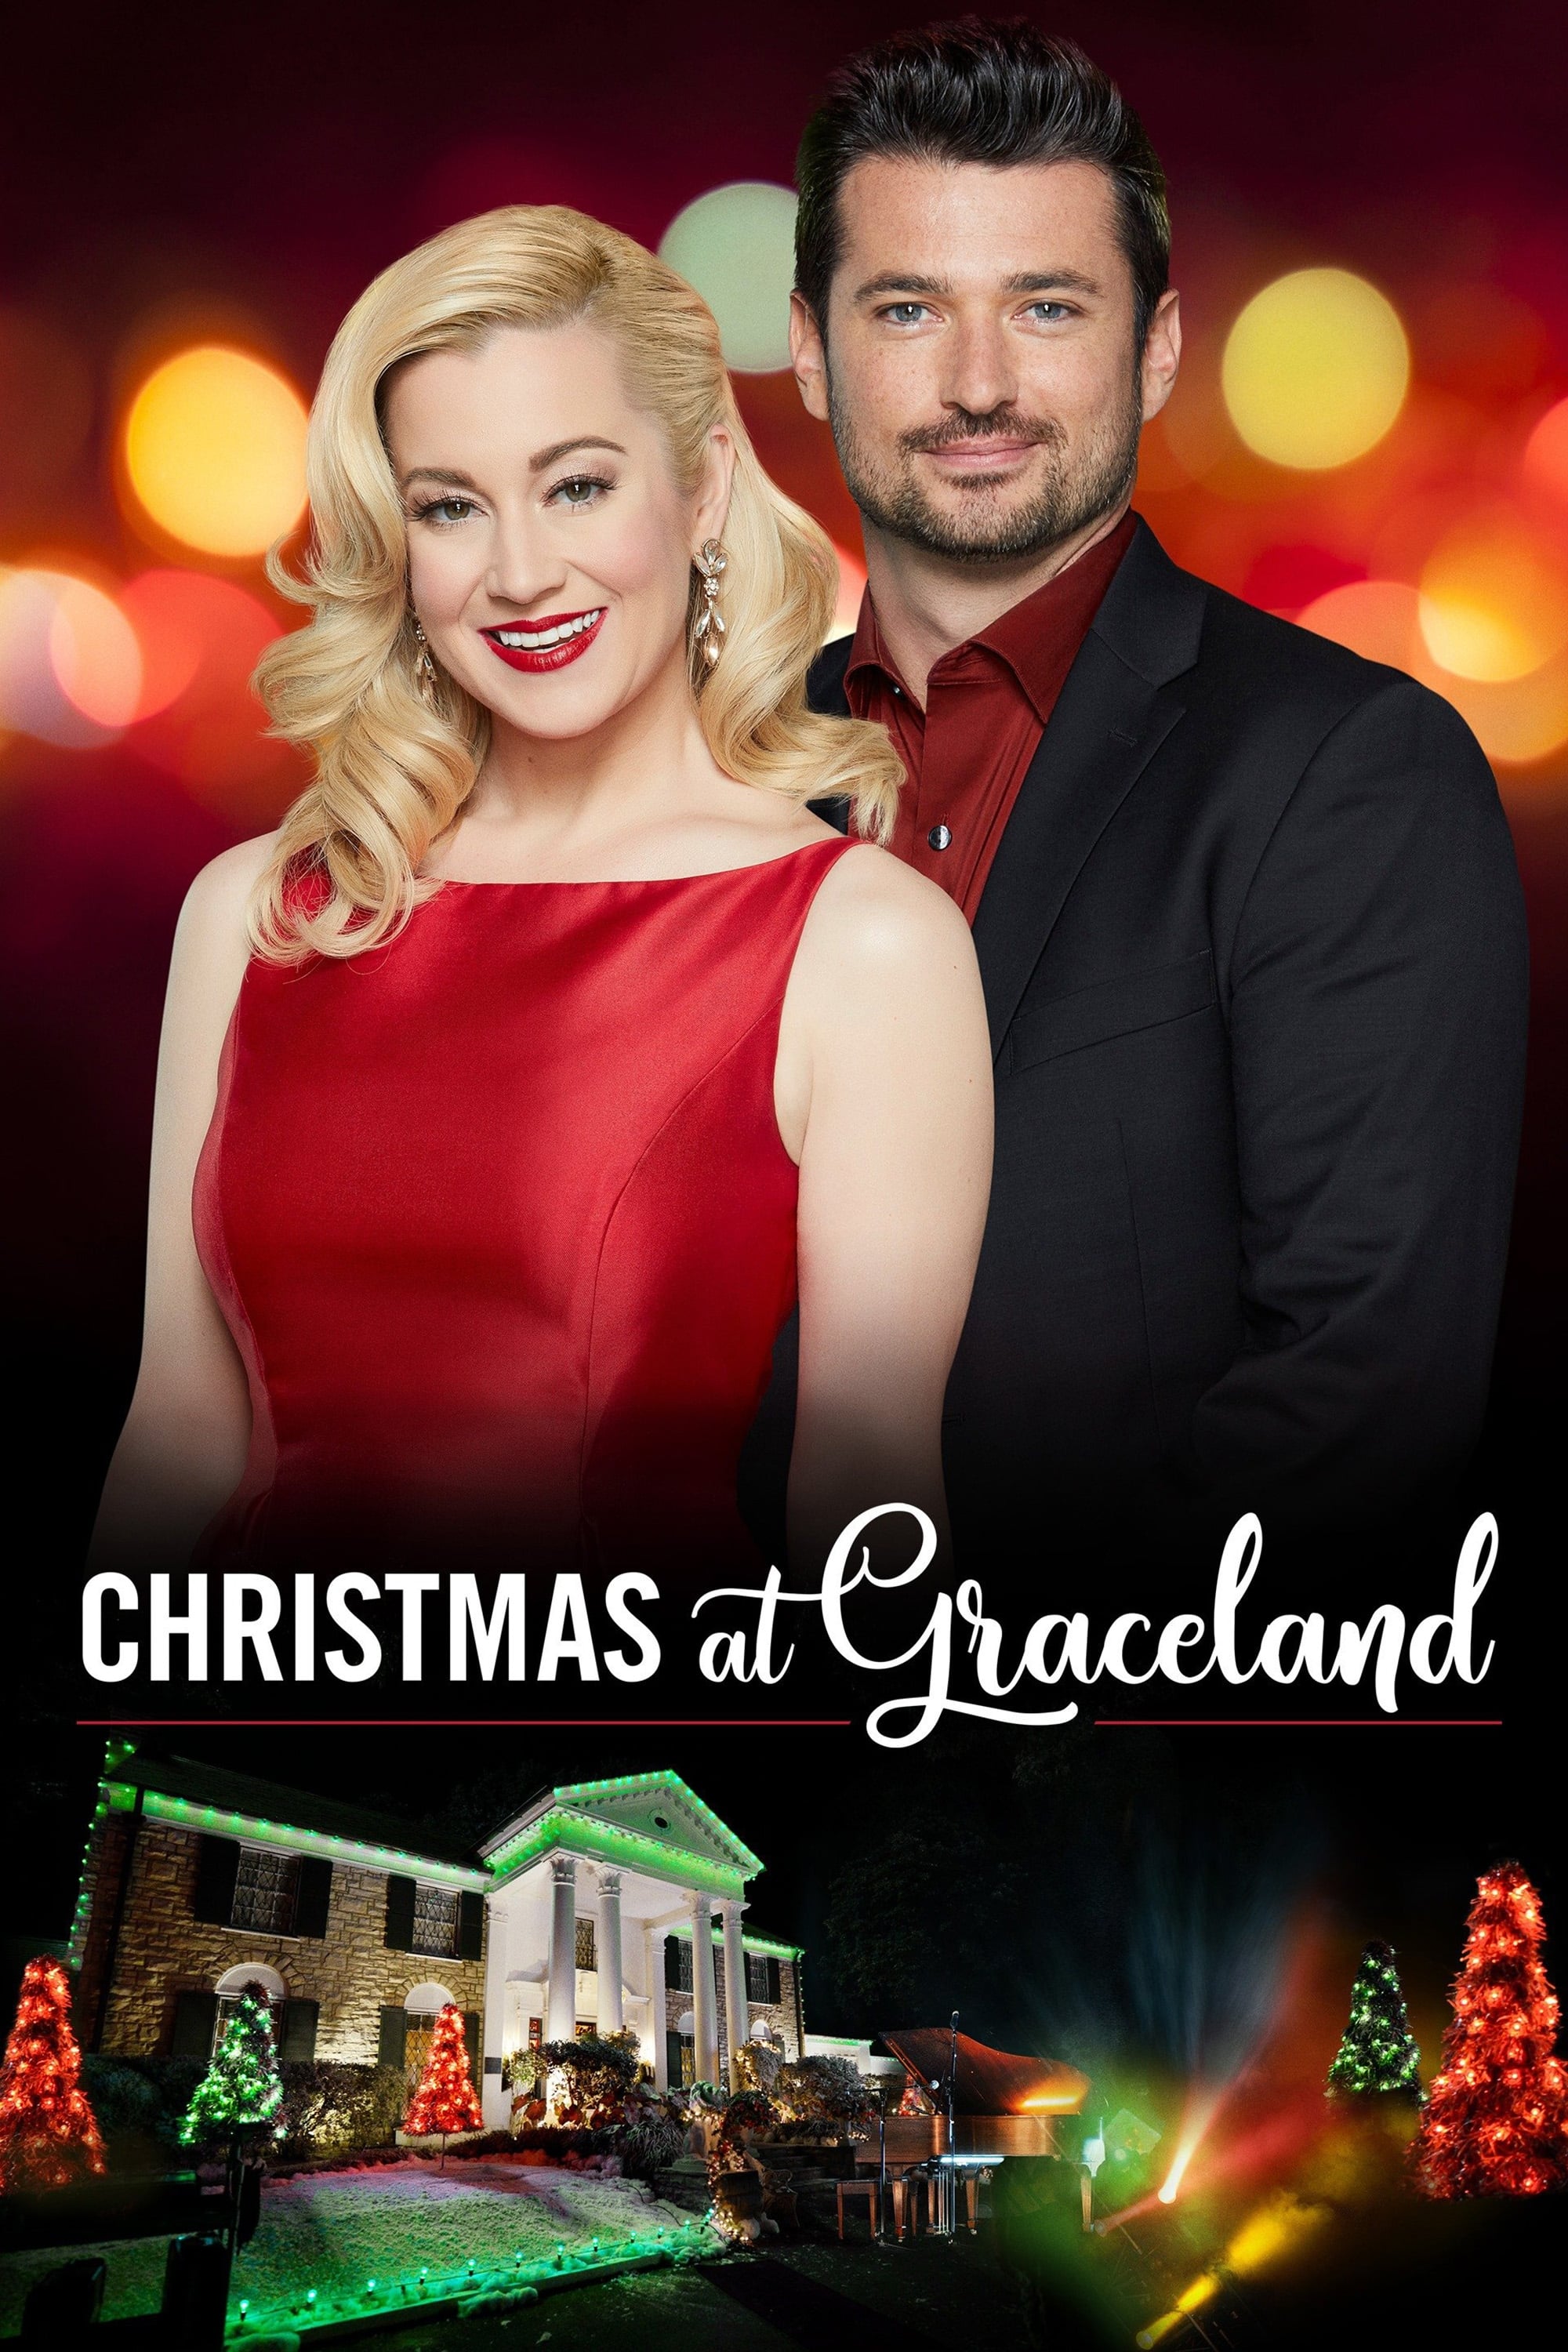 Christmas at Graceland (2018) The Poster Database (TPDb)